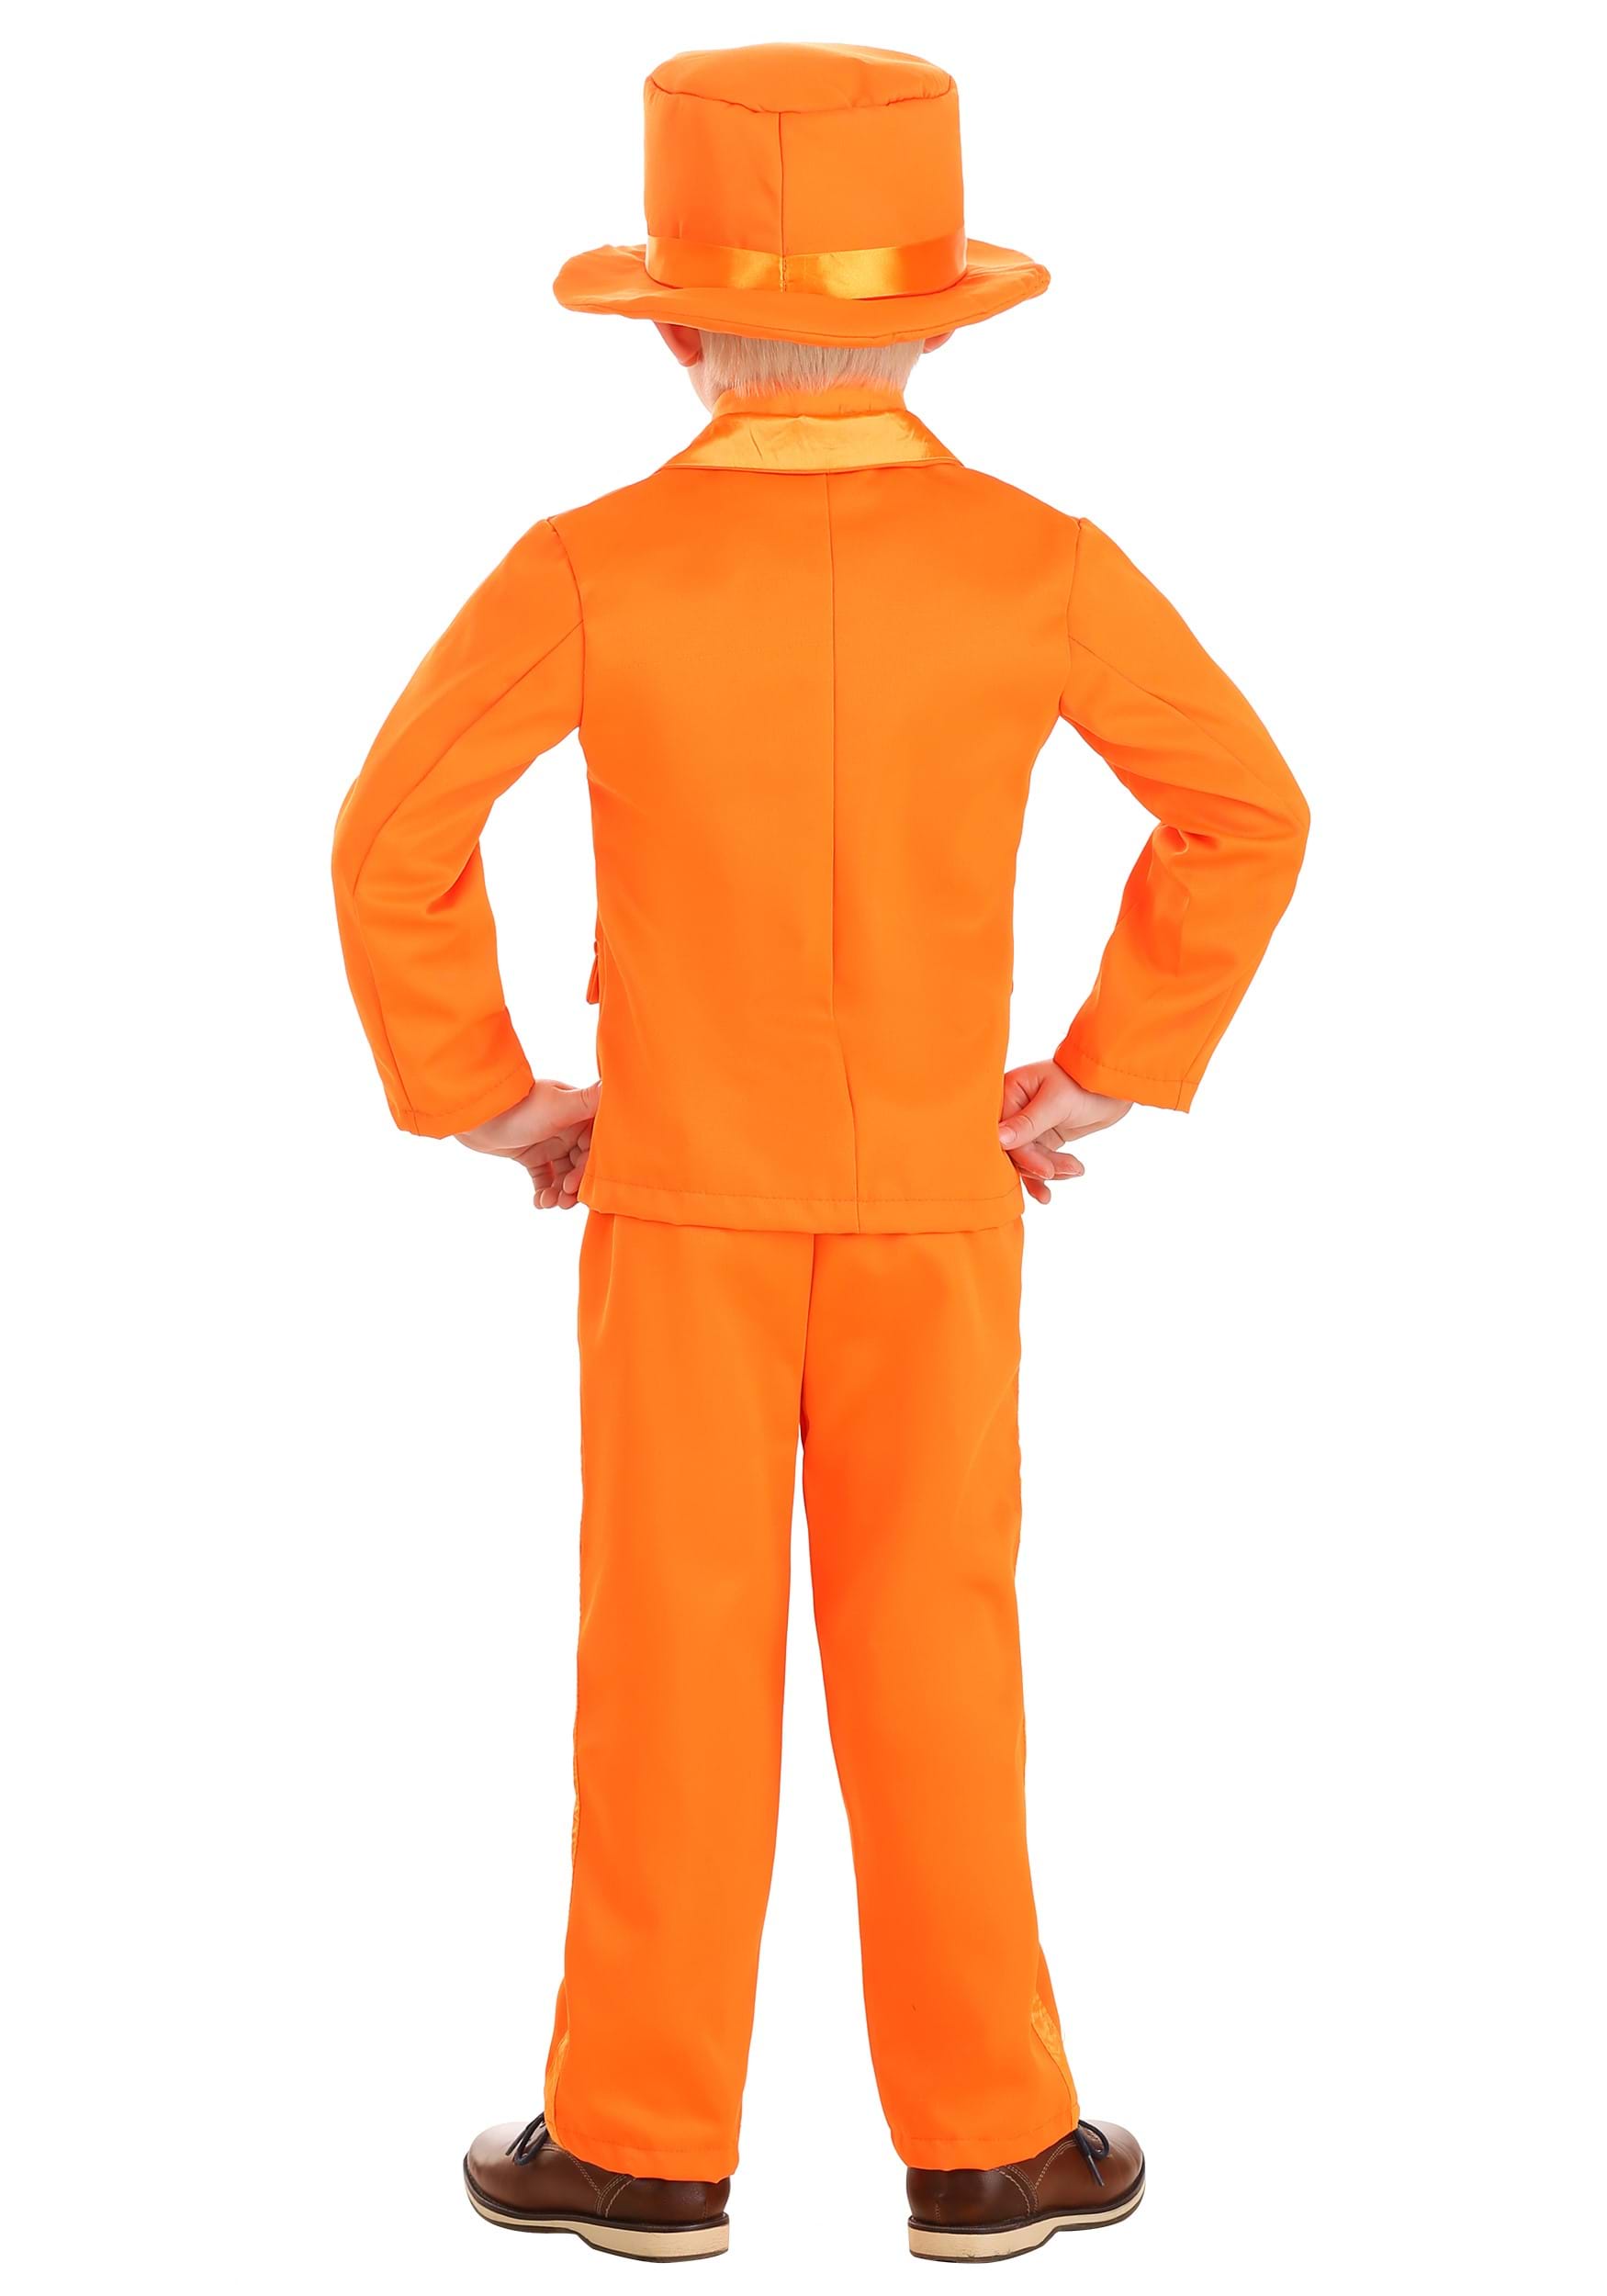 Orange Tuxedo Costume For Toddlers , Exclusive , Made By Us